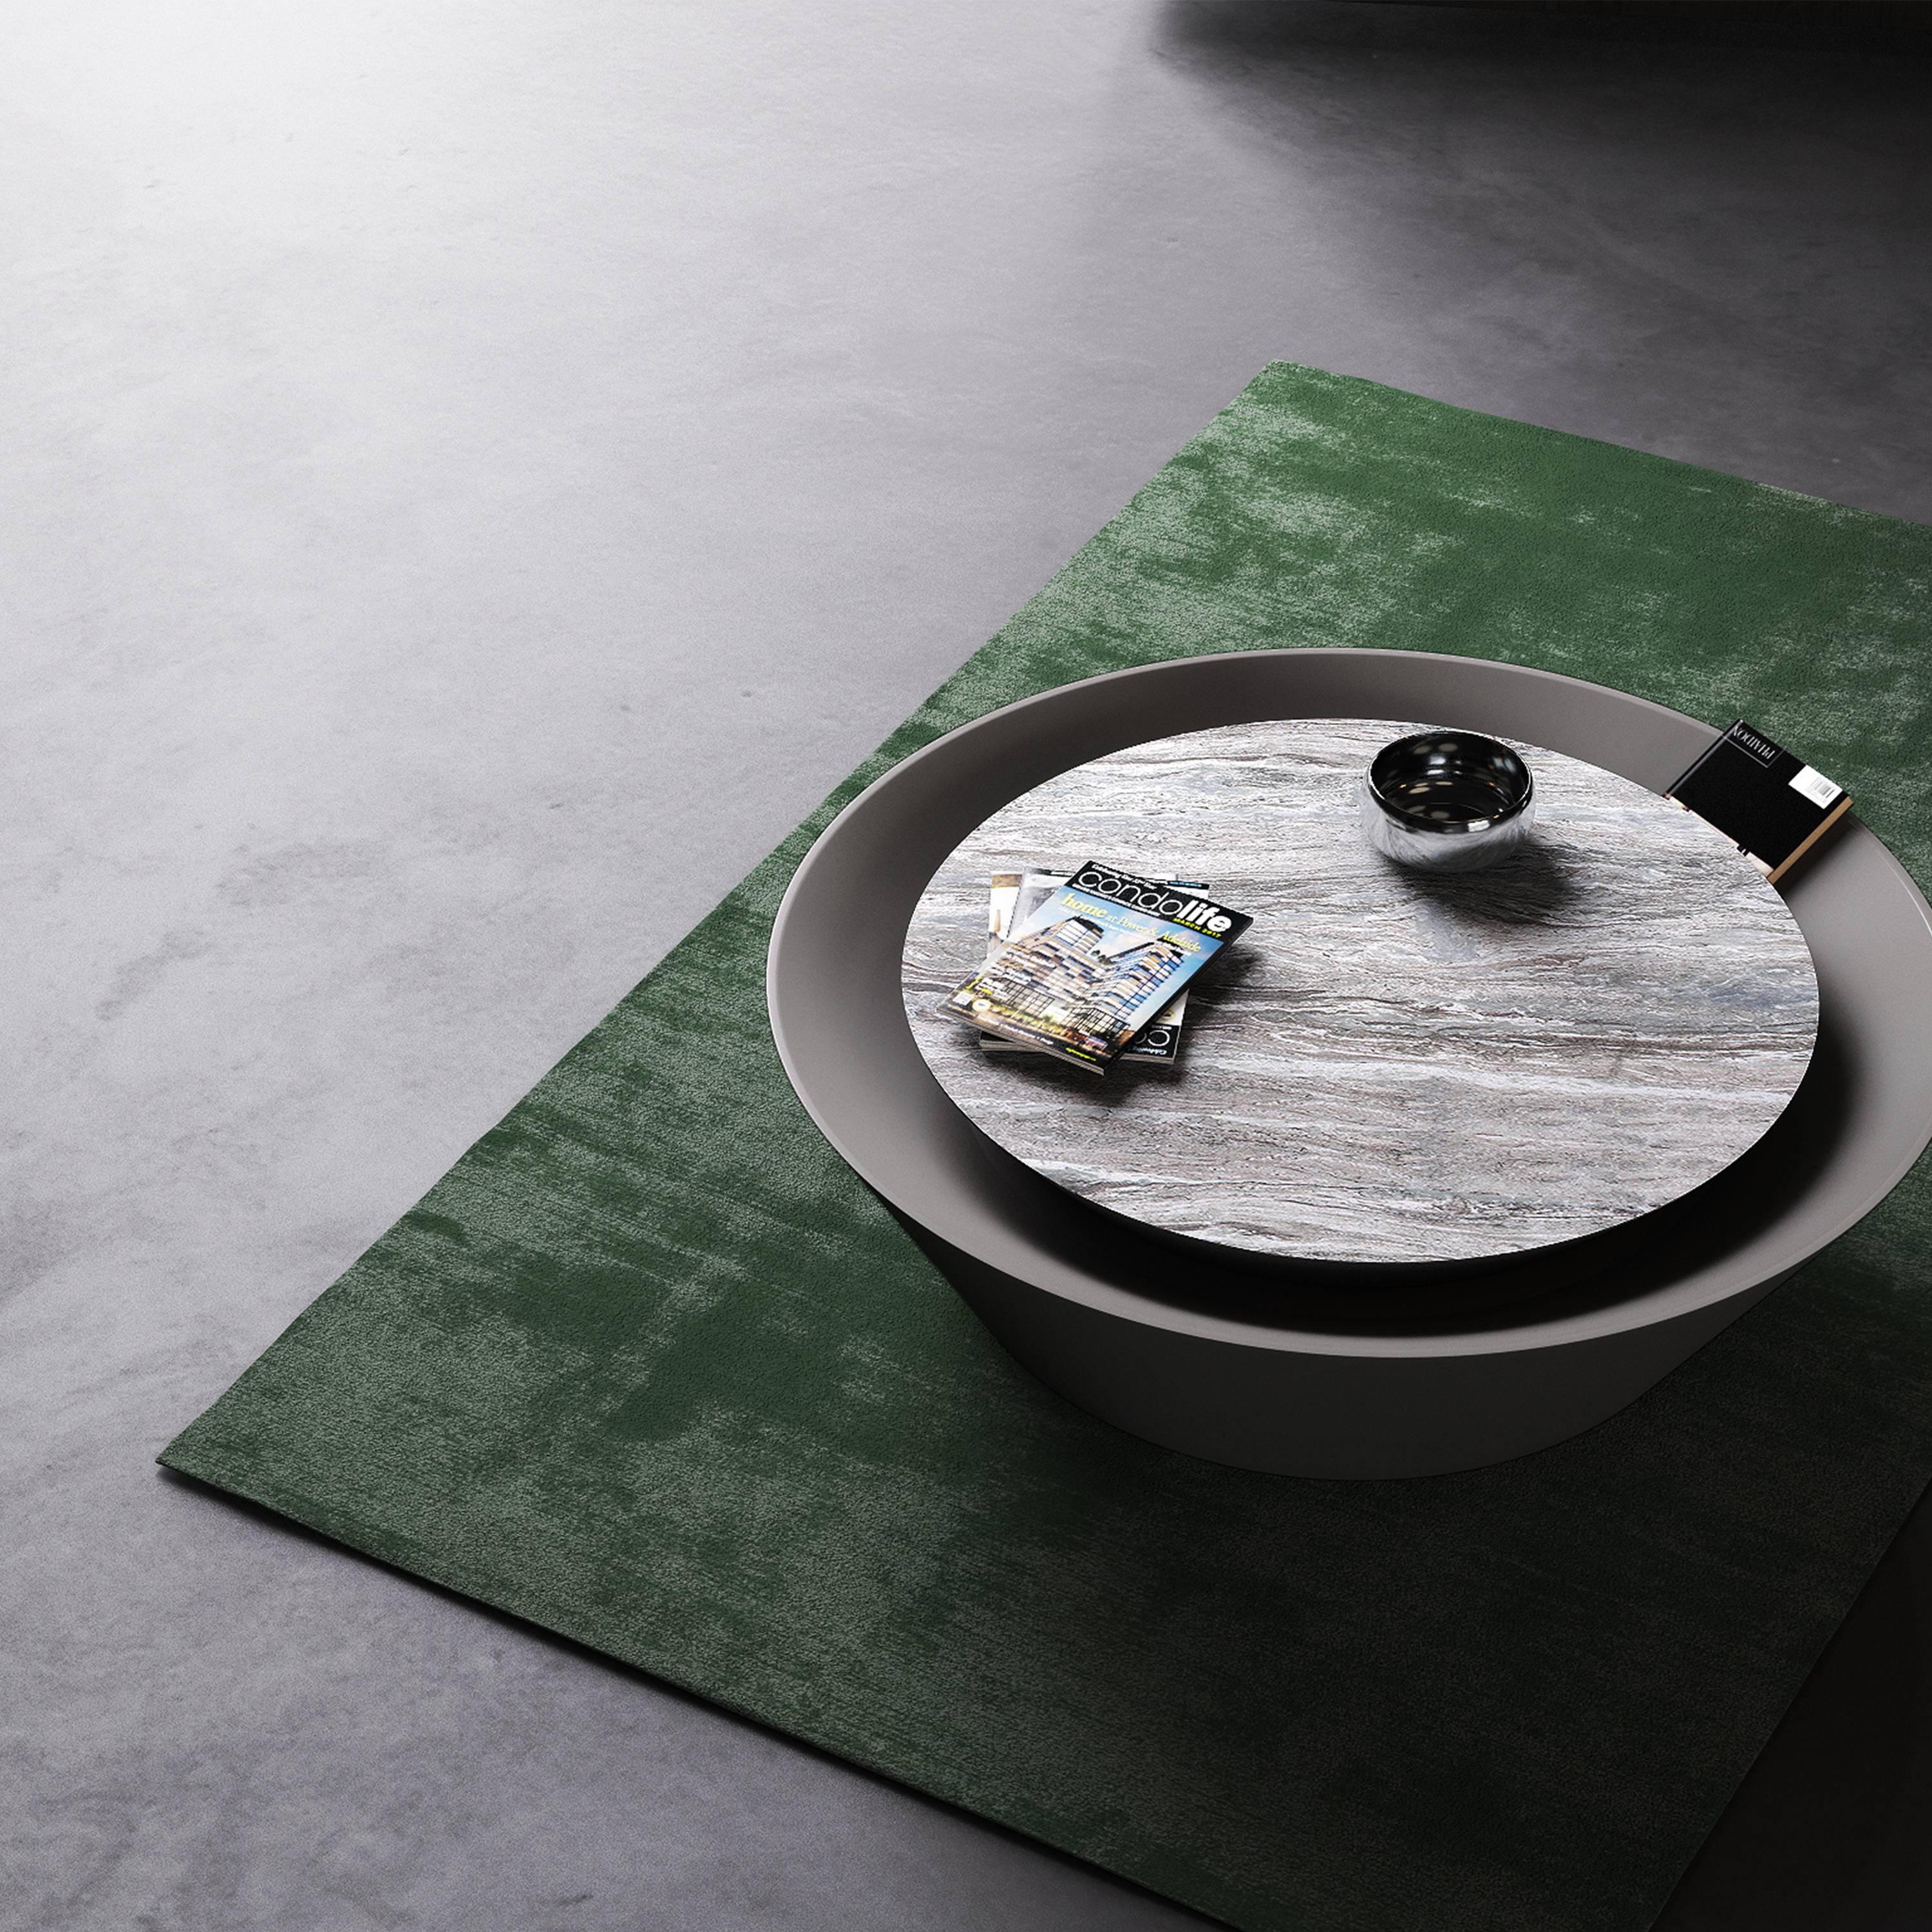 Minimalist 21st Century, Modern, Contemporary, Wood, Marble, Round, Drop Coffee Table For Sale